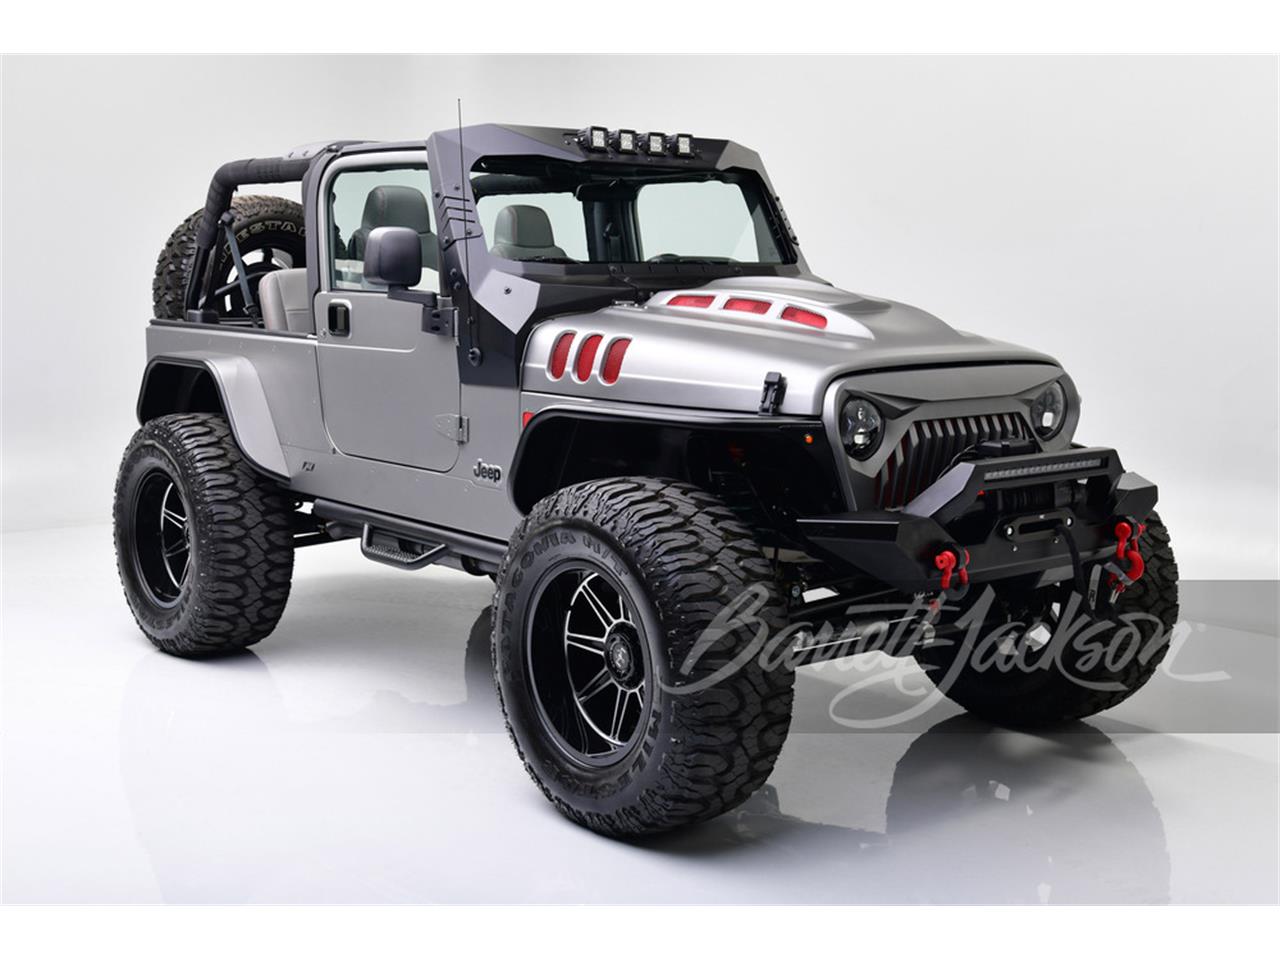 For Sale at Auction: 2006 Jeep Wrangler in Scottsdale, Arizona for sale in Scottsdale, AZ